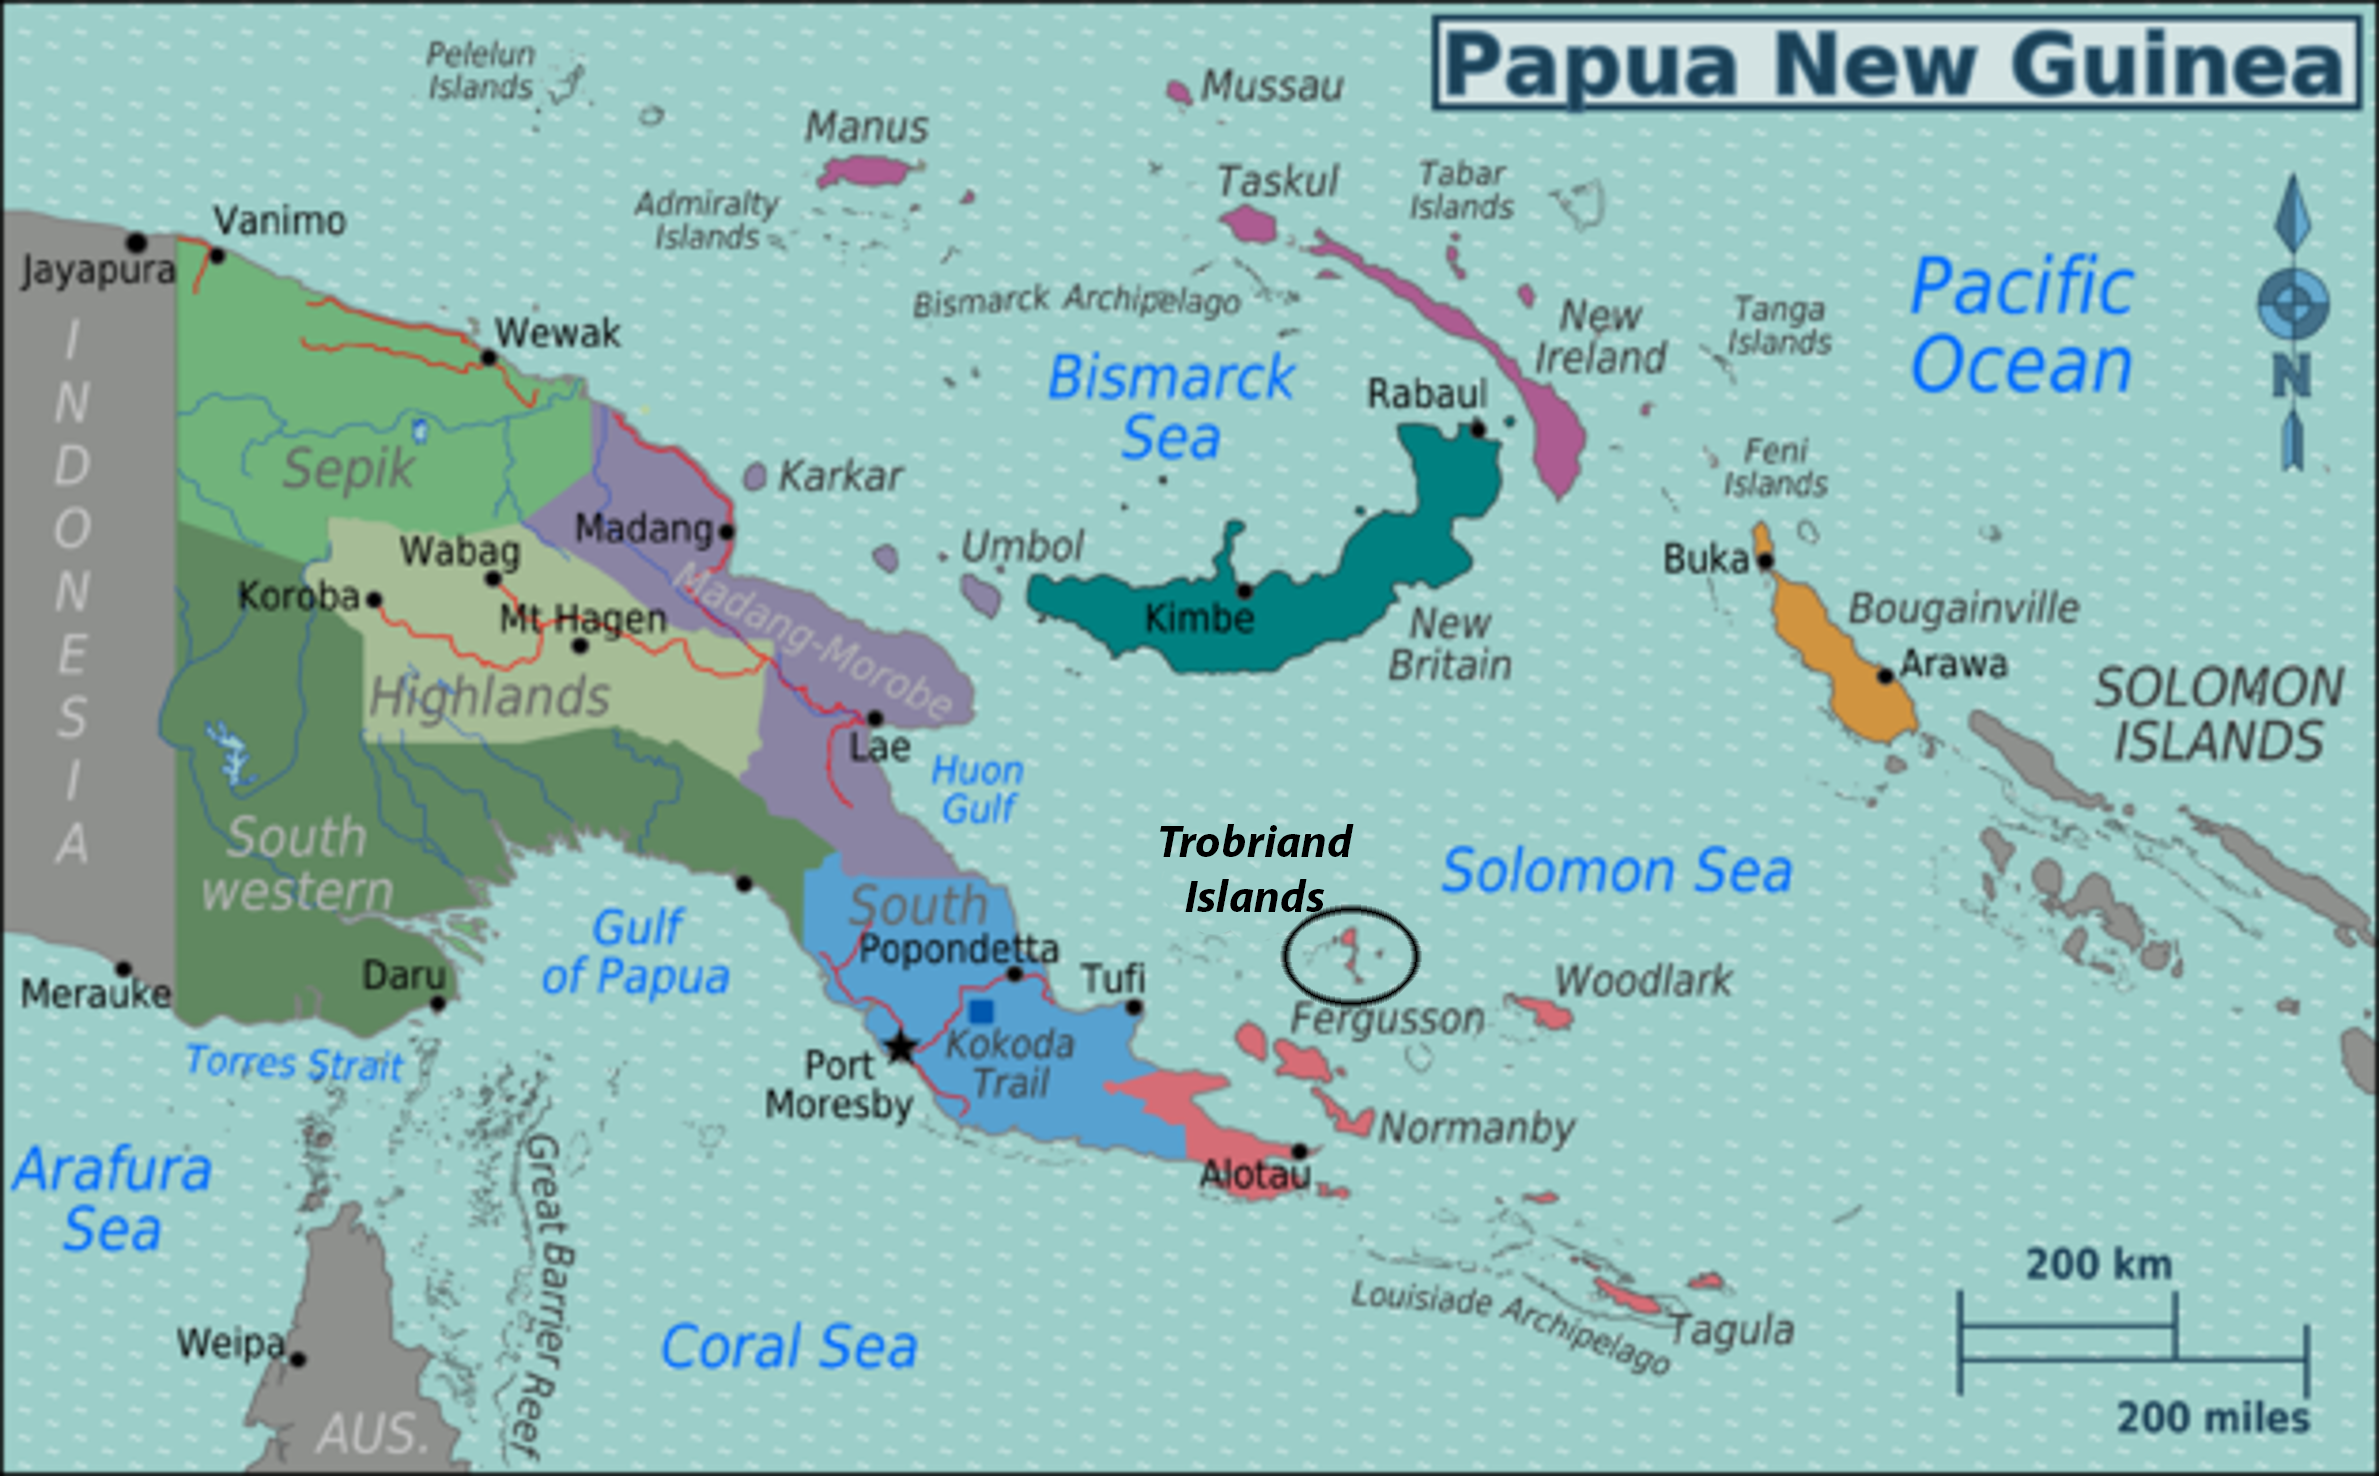 A map of Papua New Guinea, emphasizing the trobriand islands.